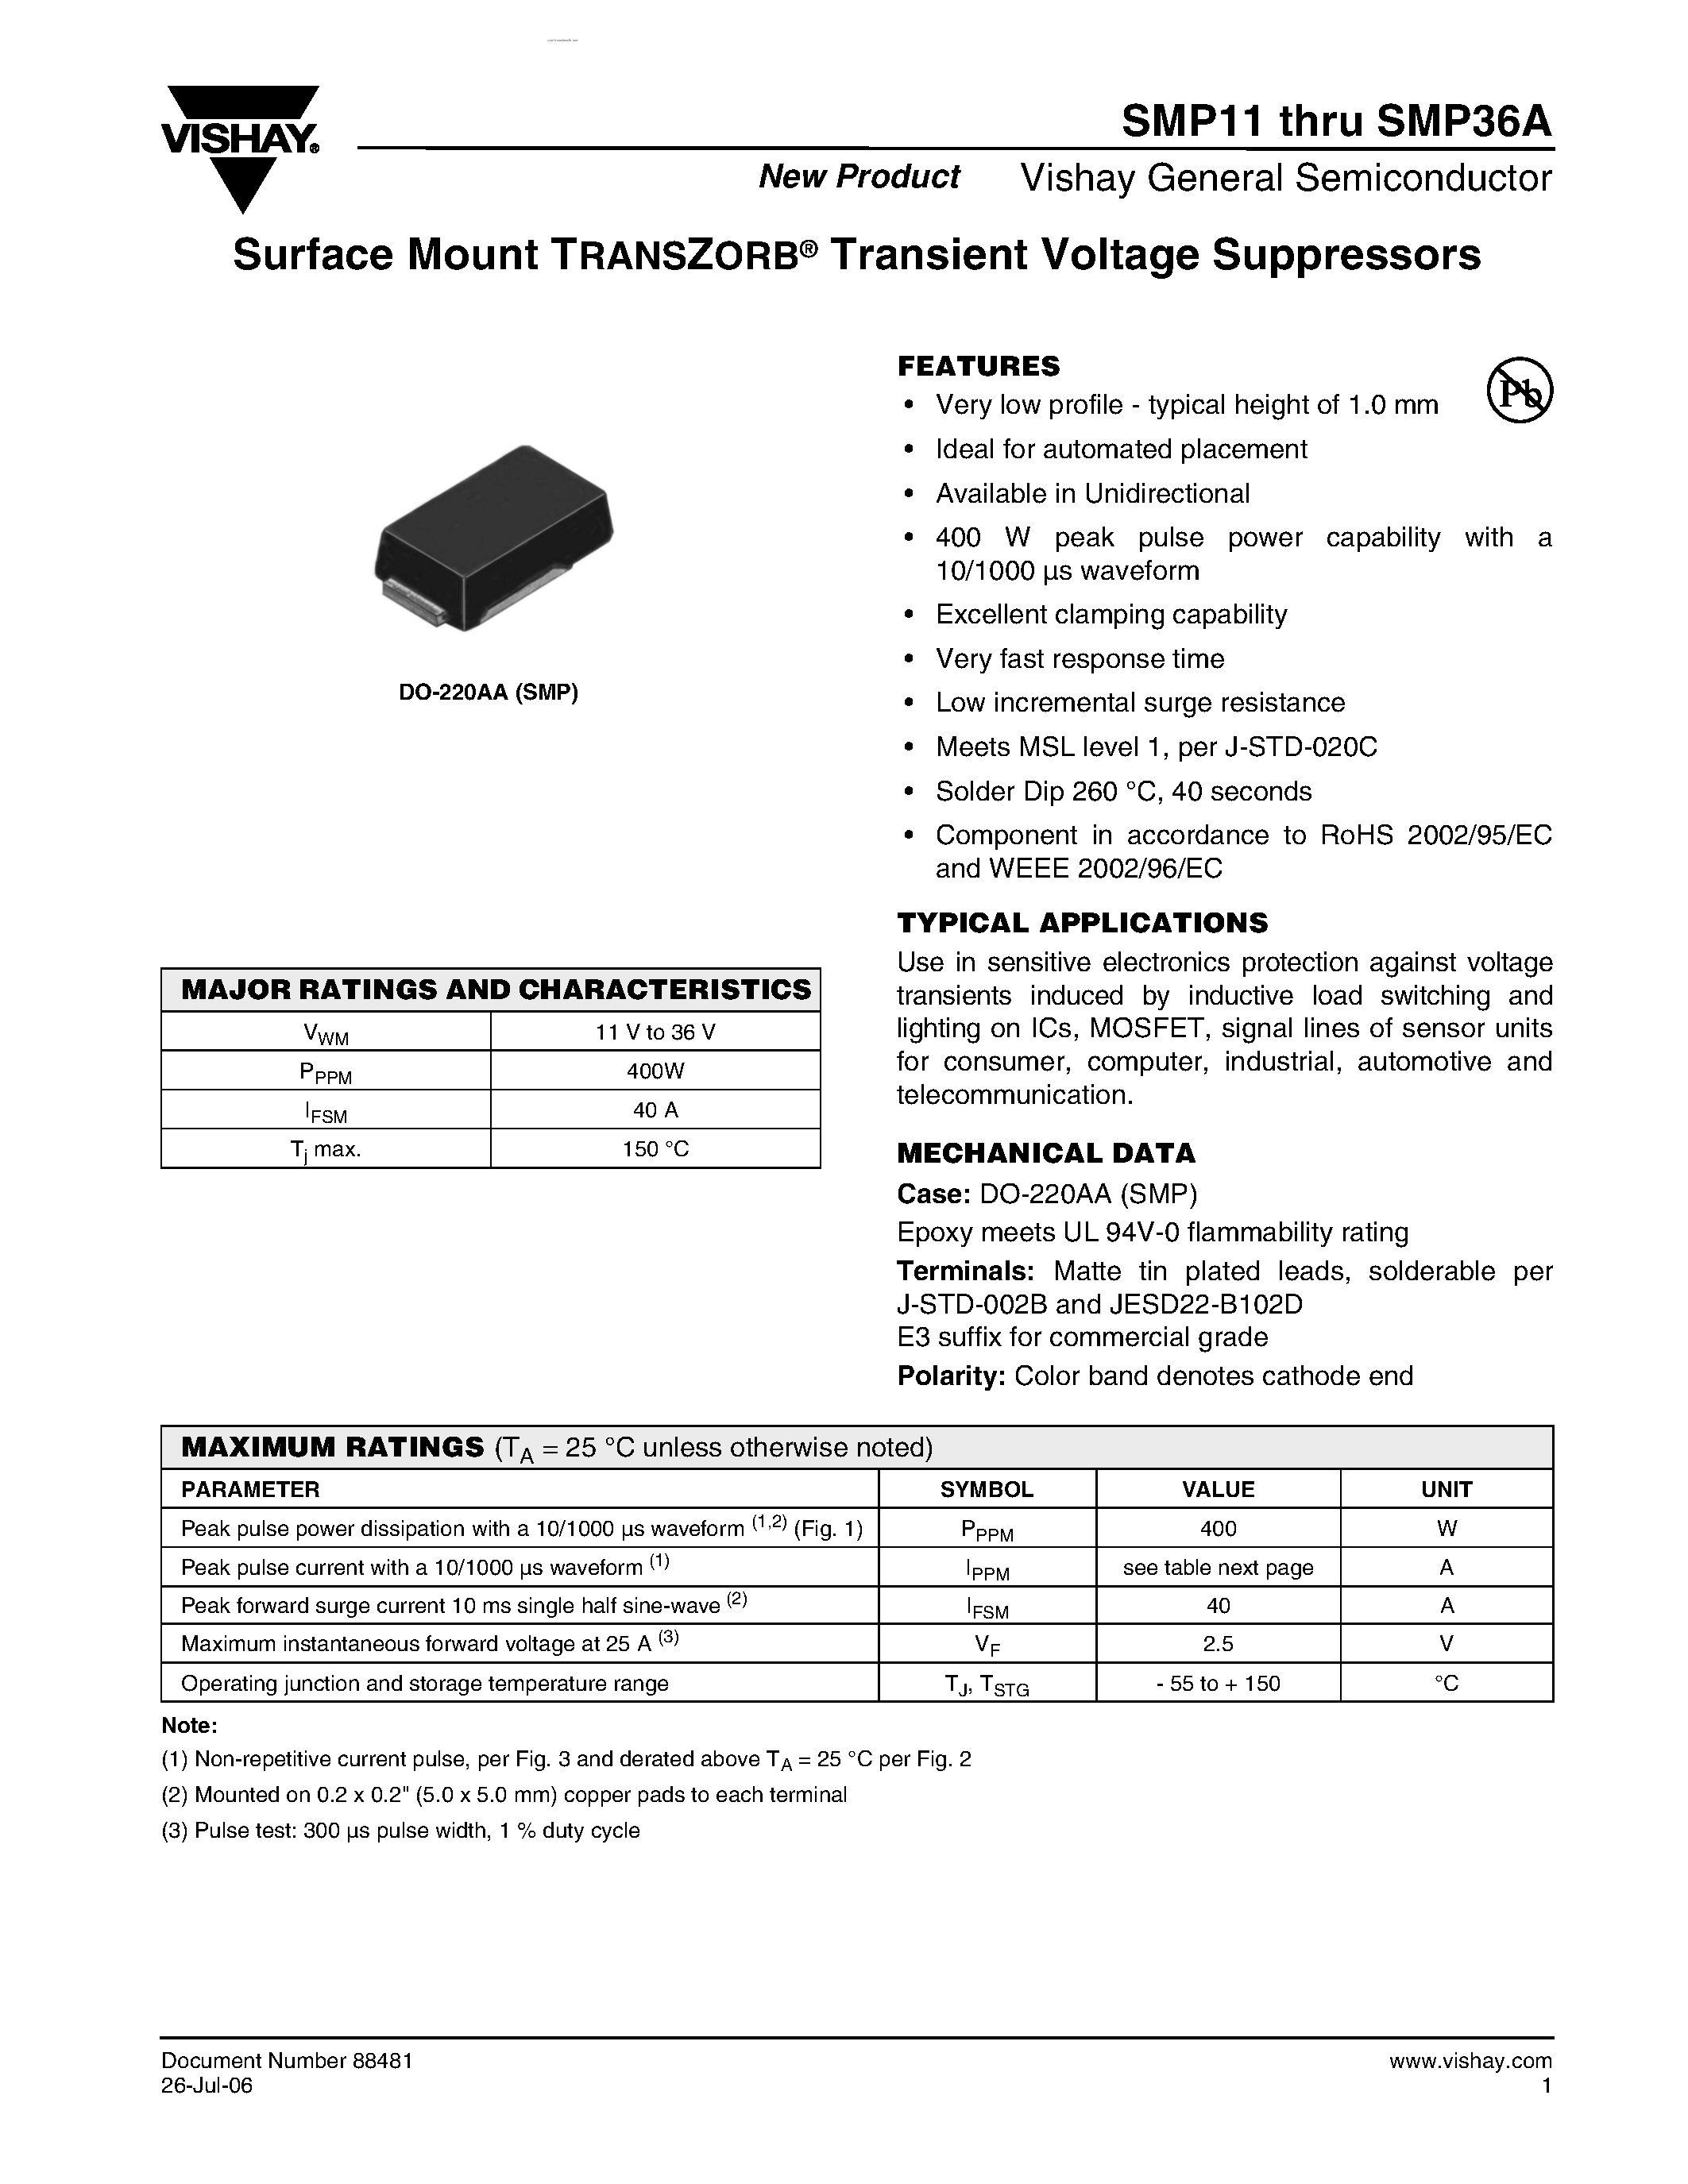 Datasheet SMP1x - (SMP11 - SMP36A) Surface Mount TRANSZORB Transient Voltage Suppressors page 1